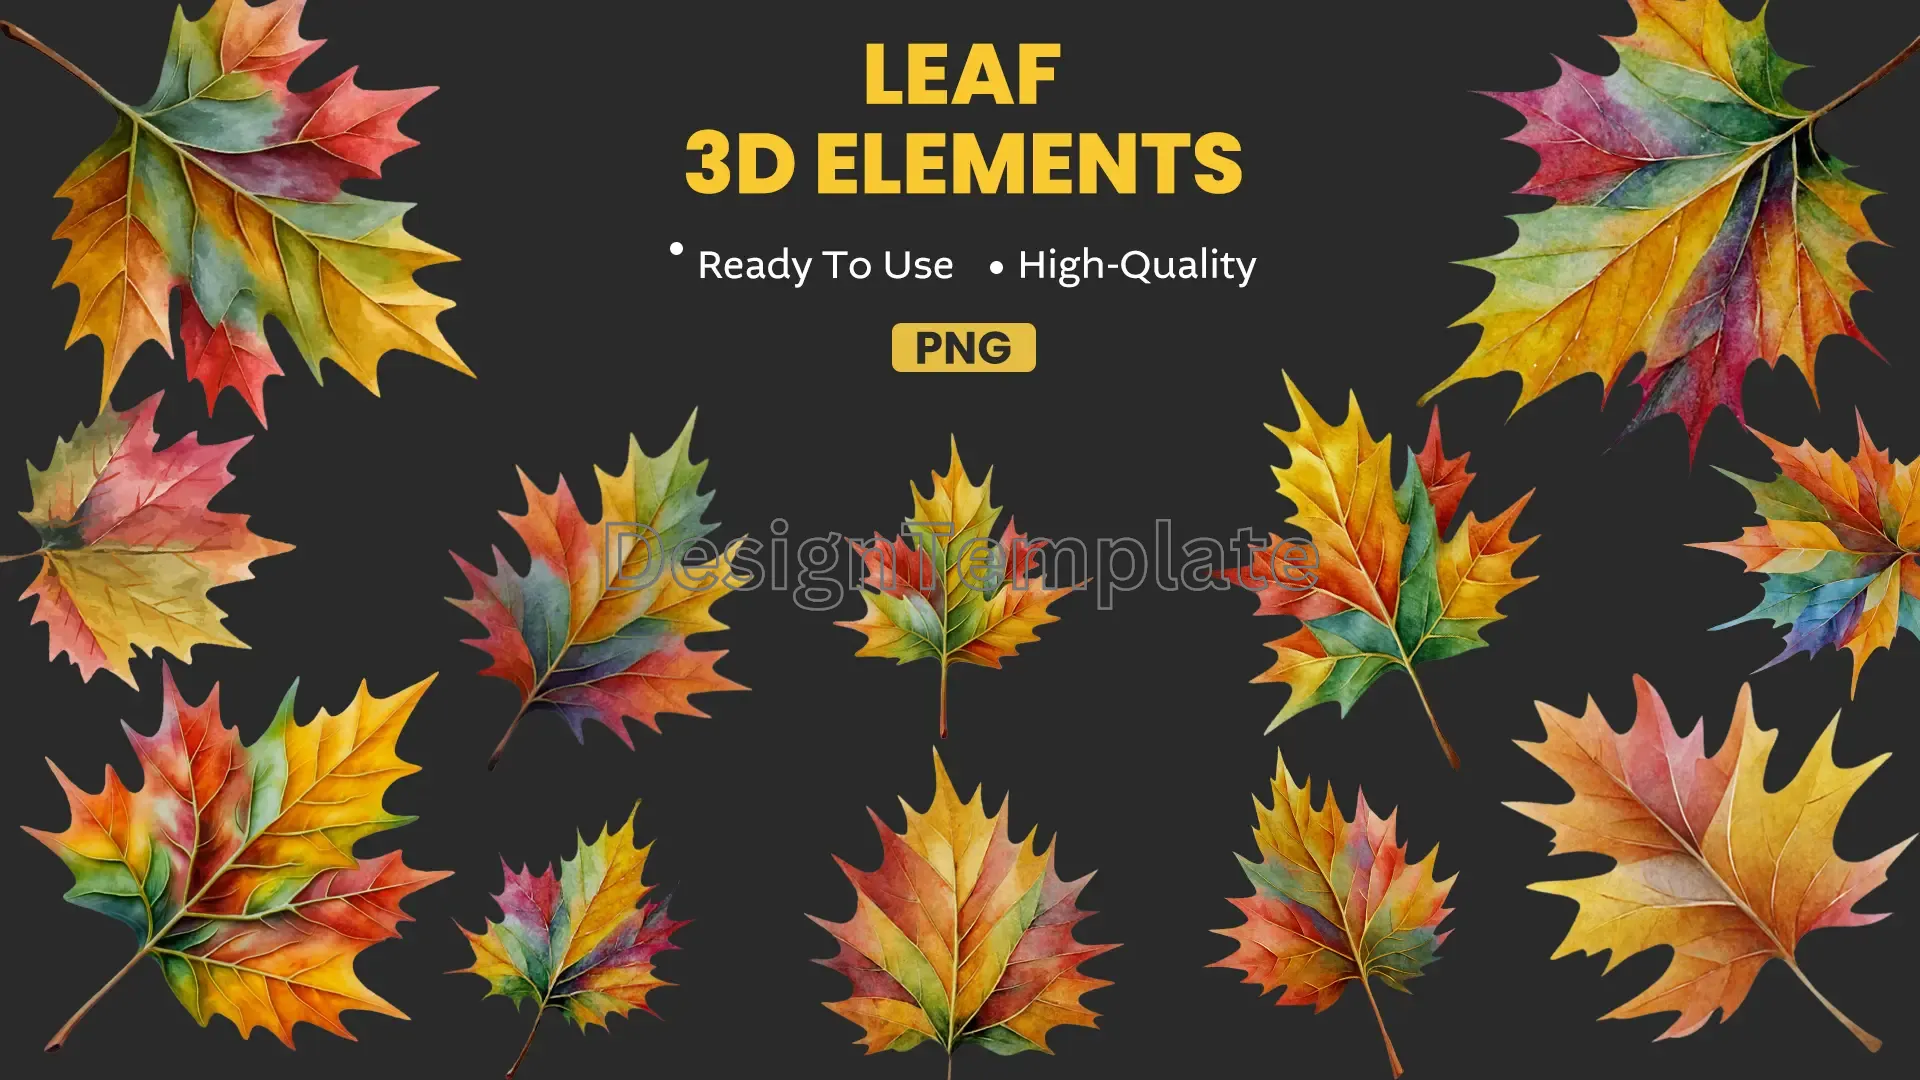 Colorful Leaves 3D Elements Pack image